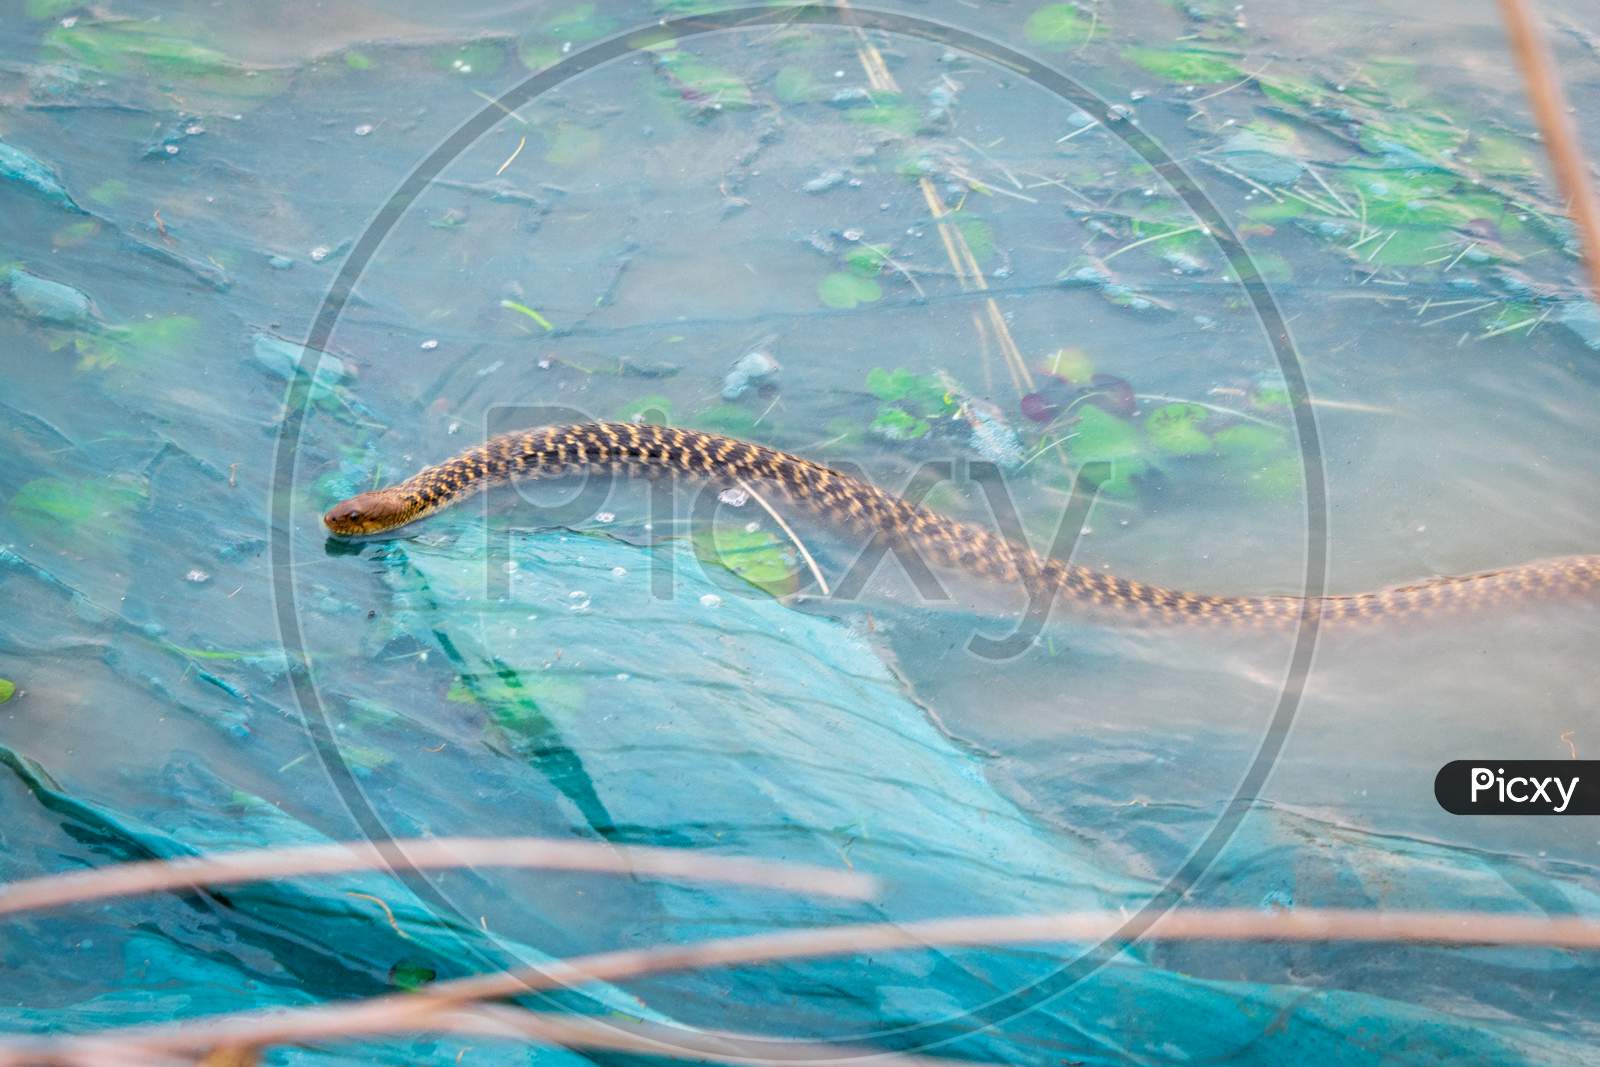 Photo of a rat snake on the fishing net by the lake